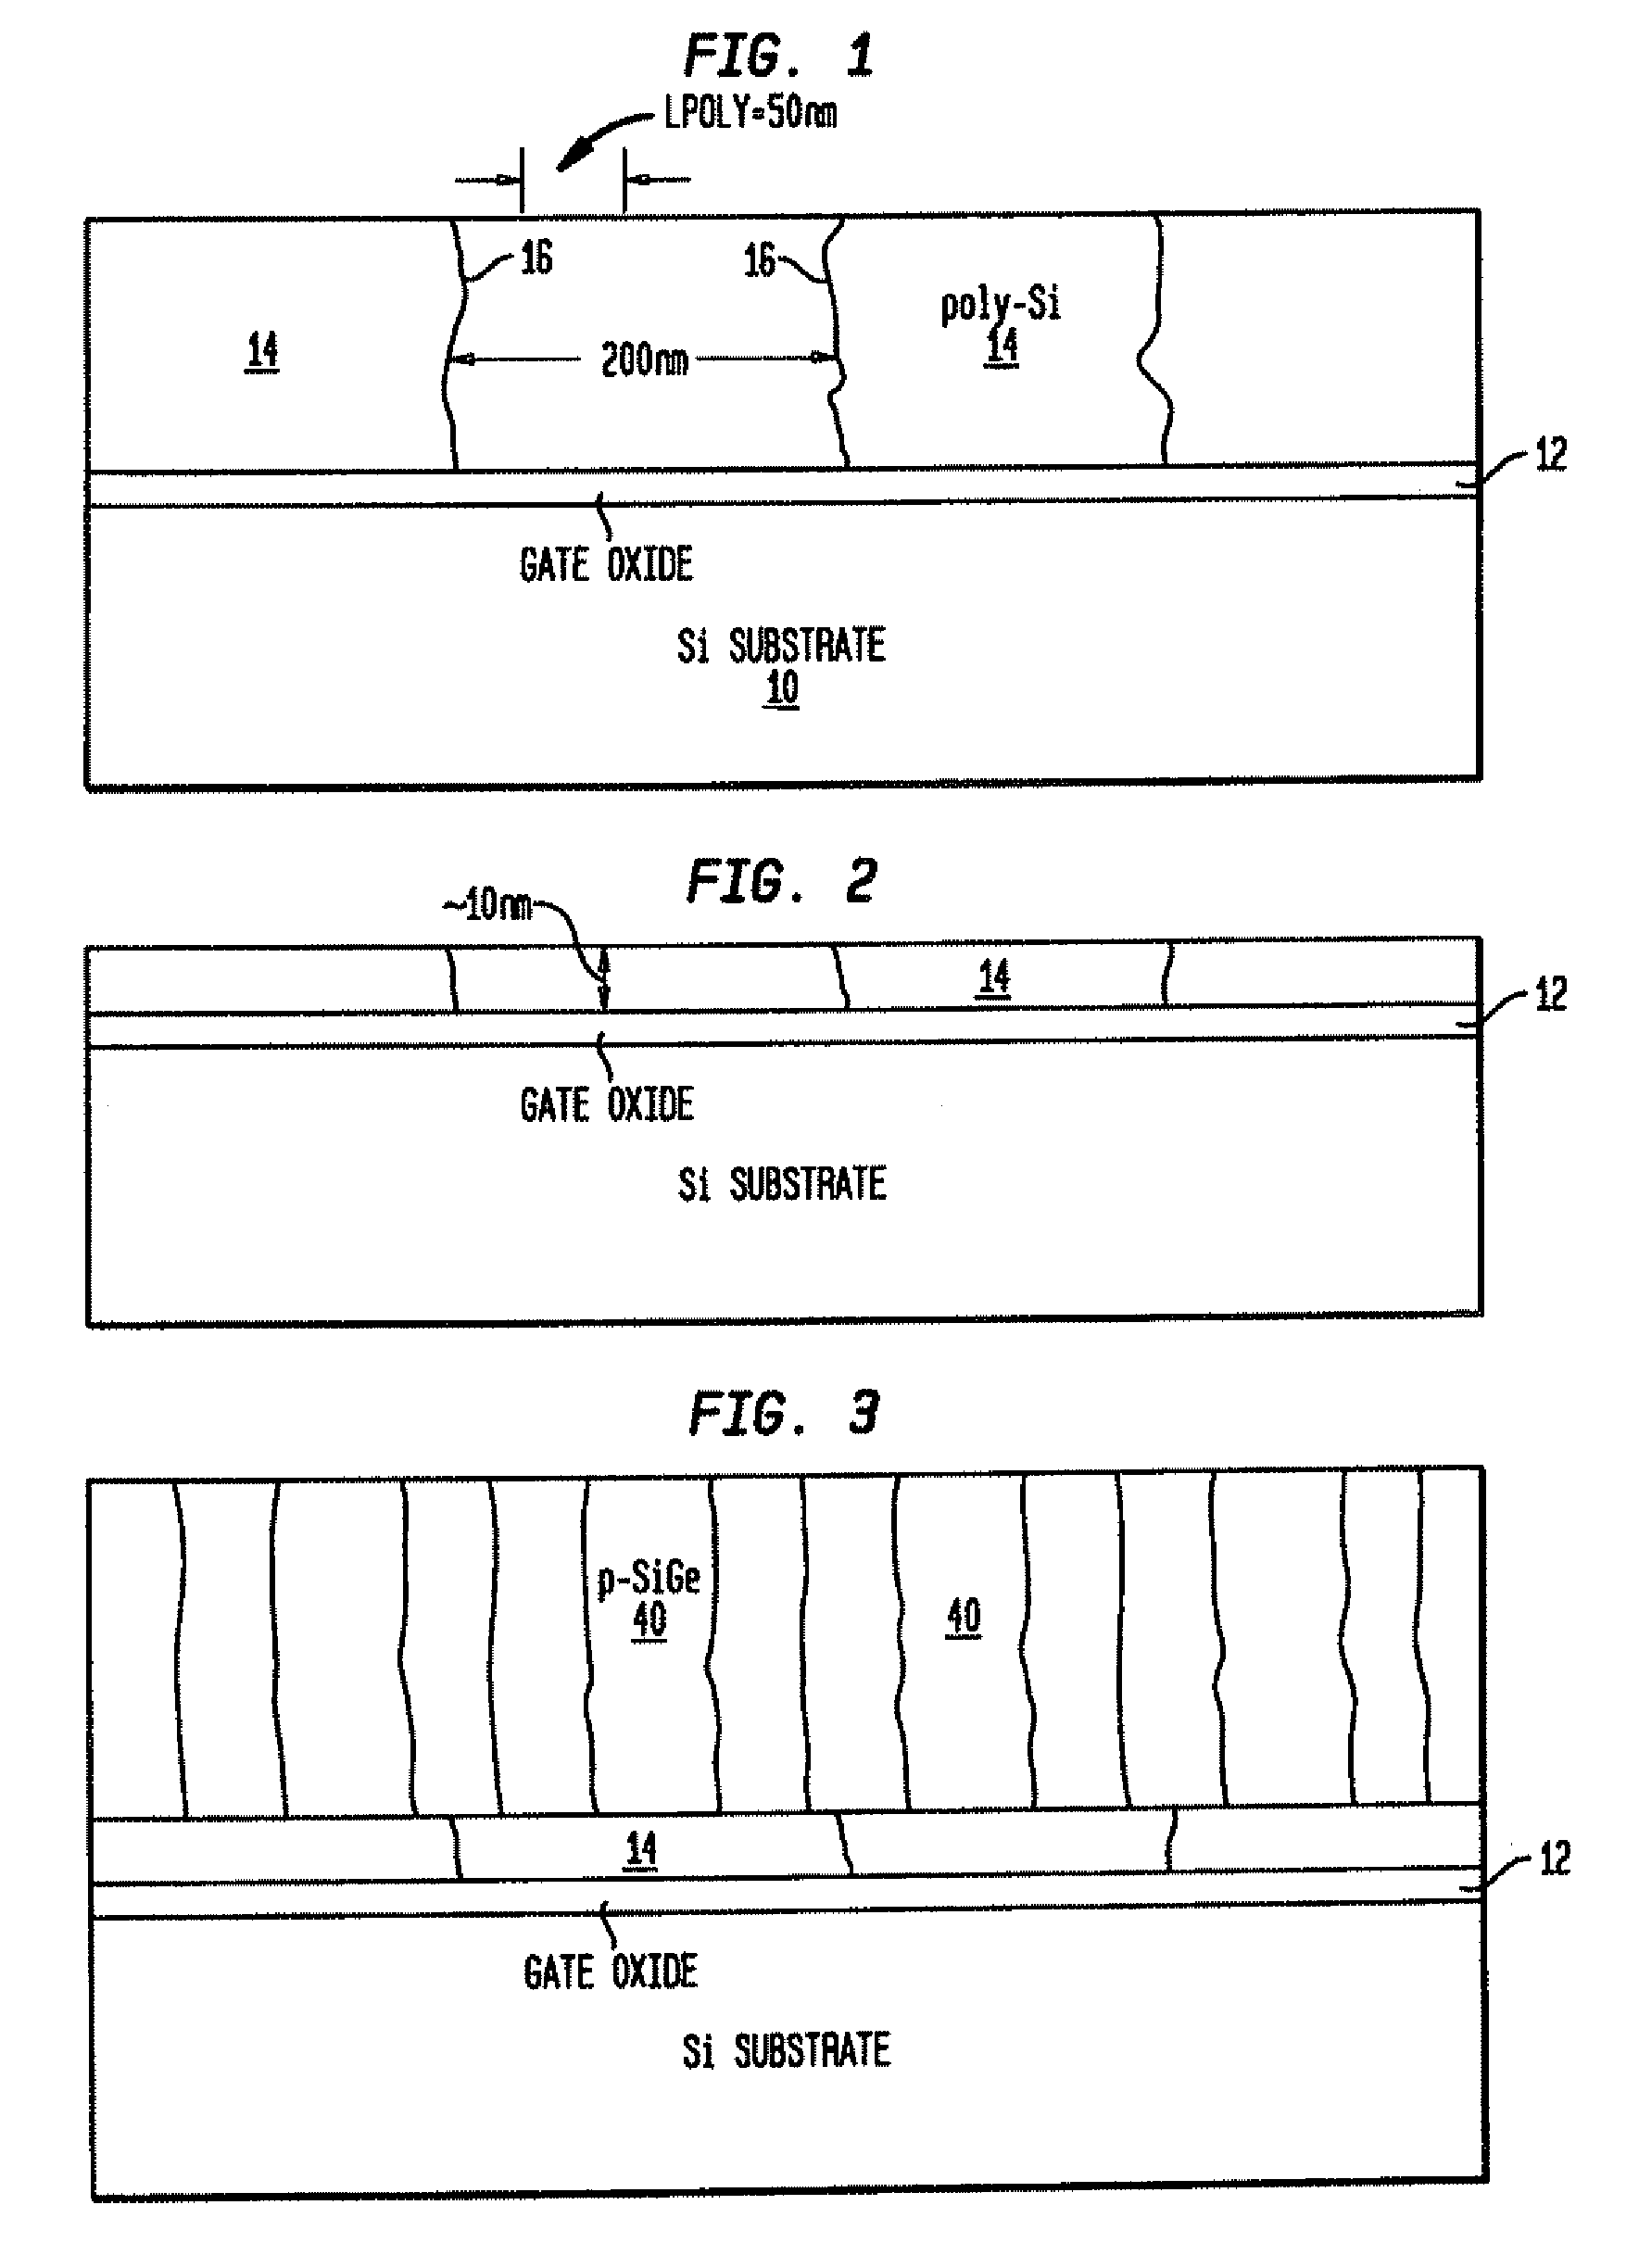 Structures and methods for manufacturing of dislocation free stressed channels in bulk silicon and SOI CMOS devices by gate stress engineering with SiGe and/or Si:C